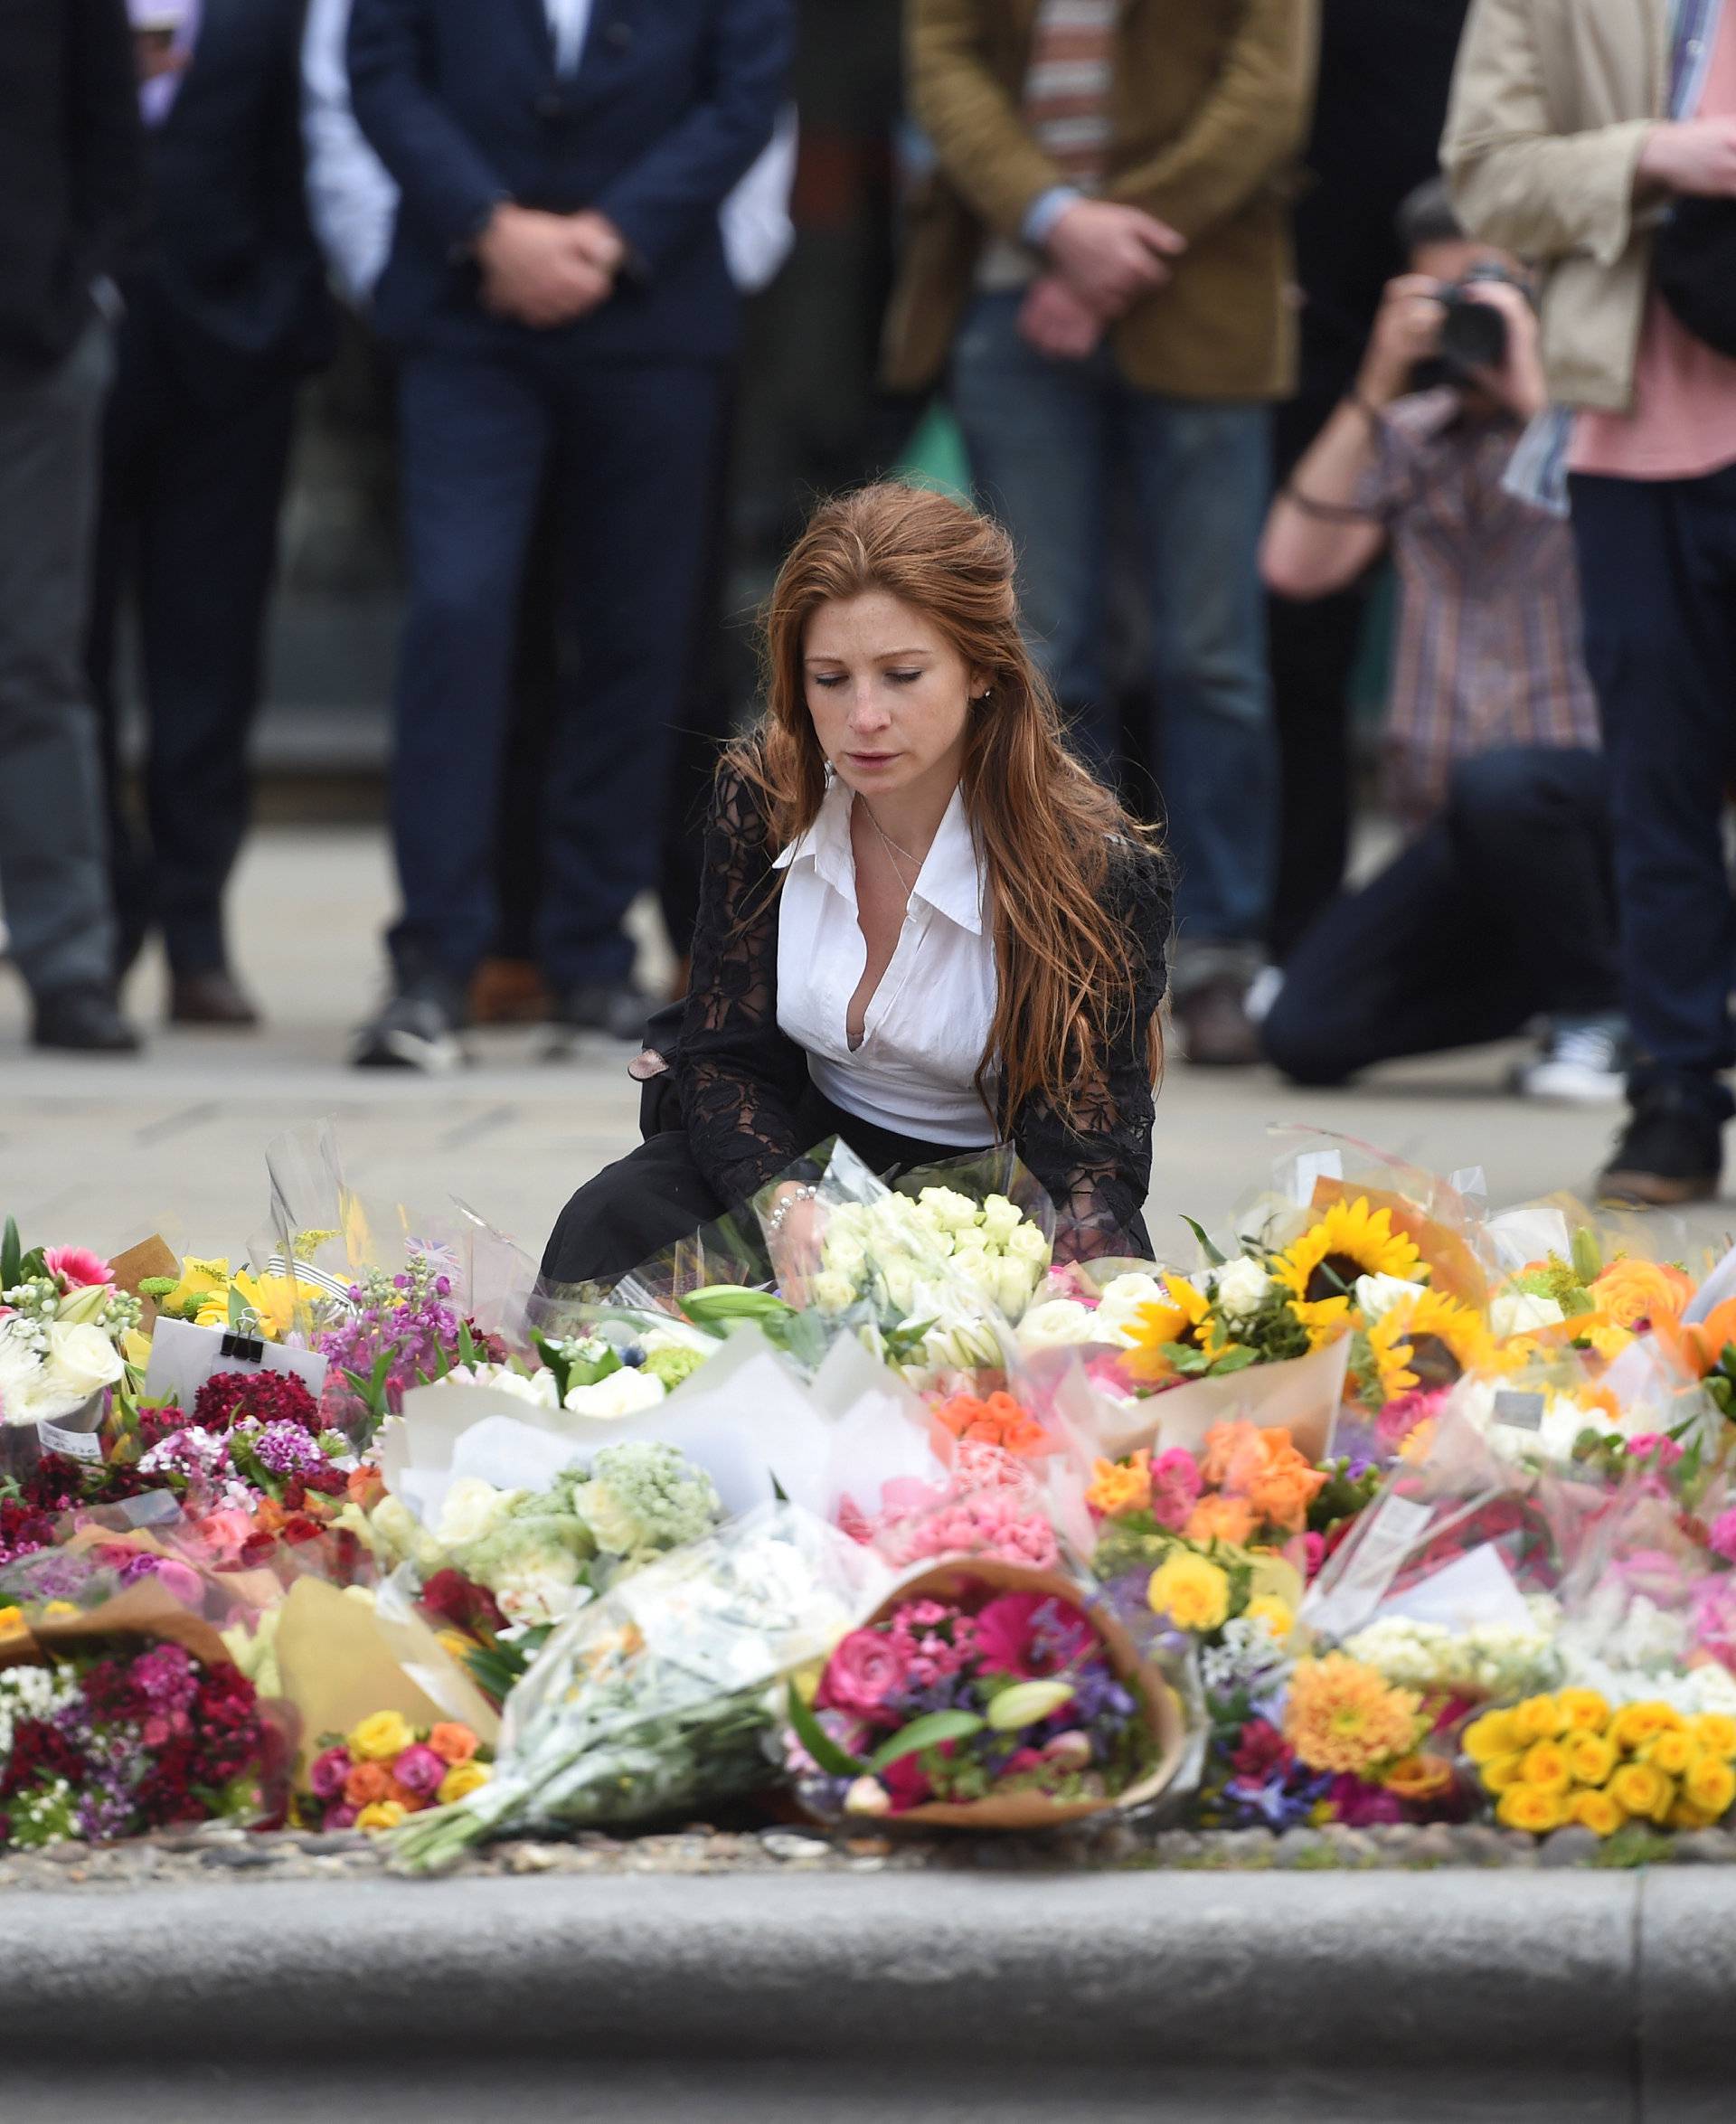 A woman reacts next to flowers left on the south side of London Bridge near Borough Market after an attack left 7 people dead and ozens of injured in London